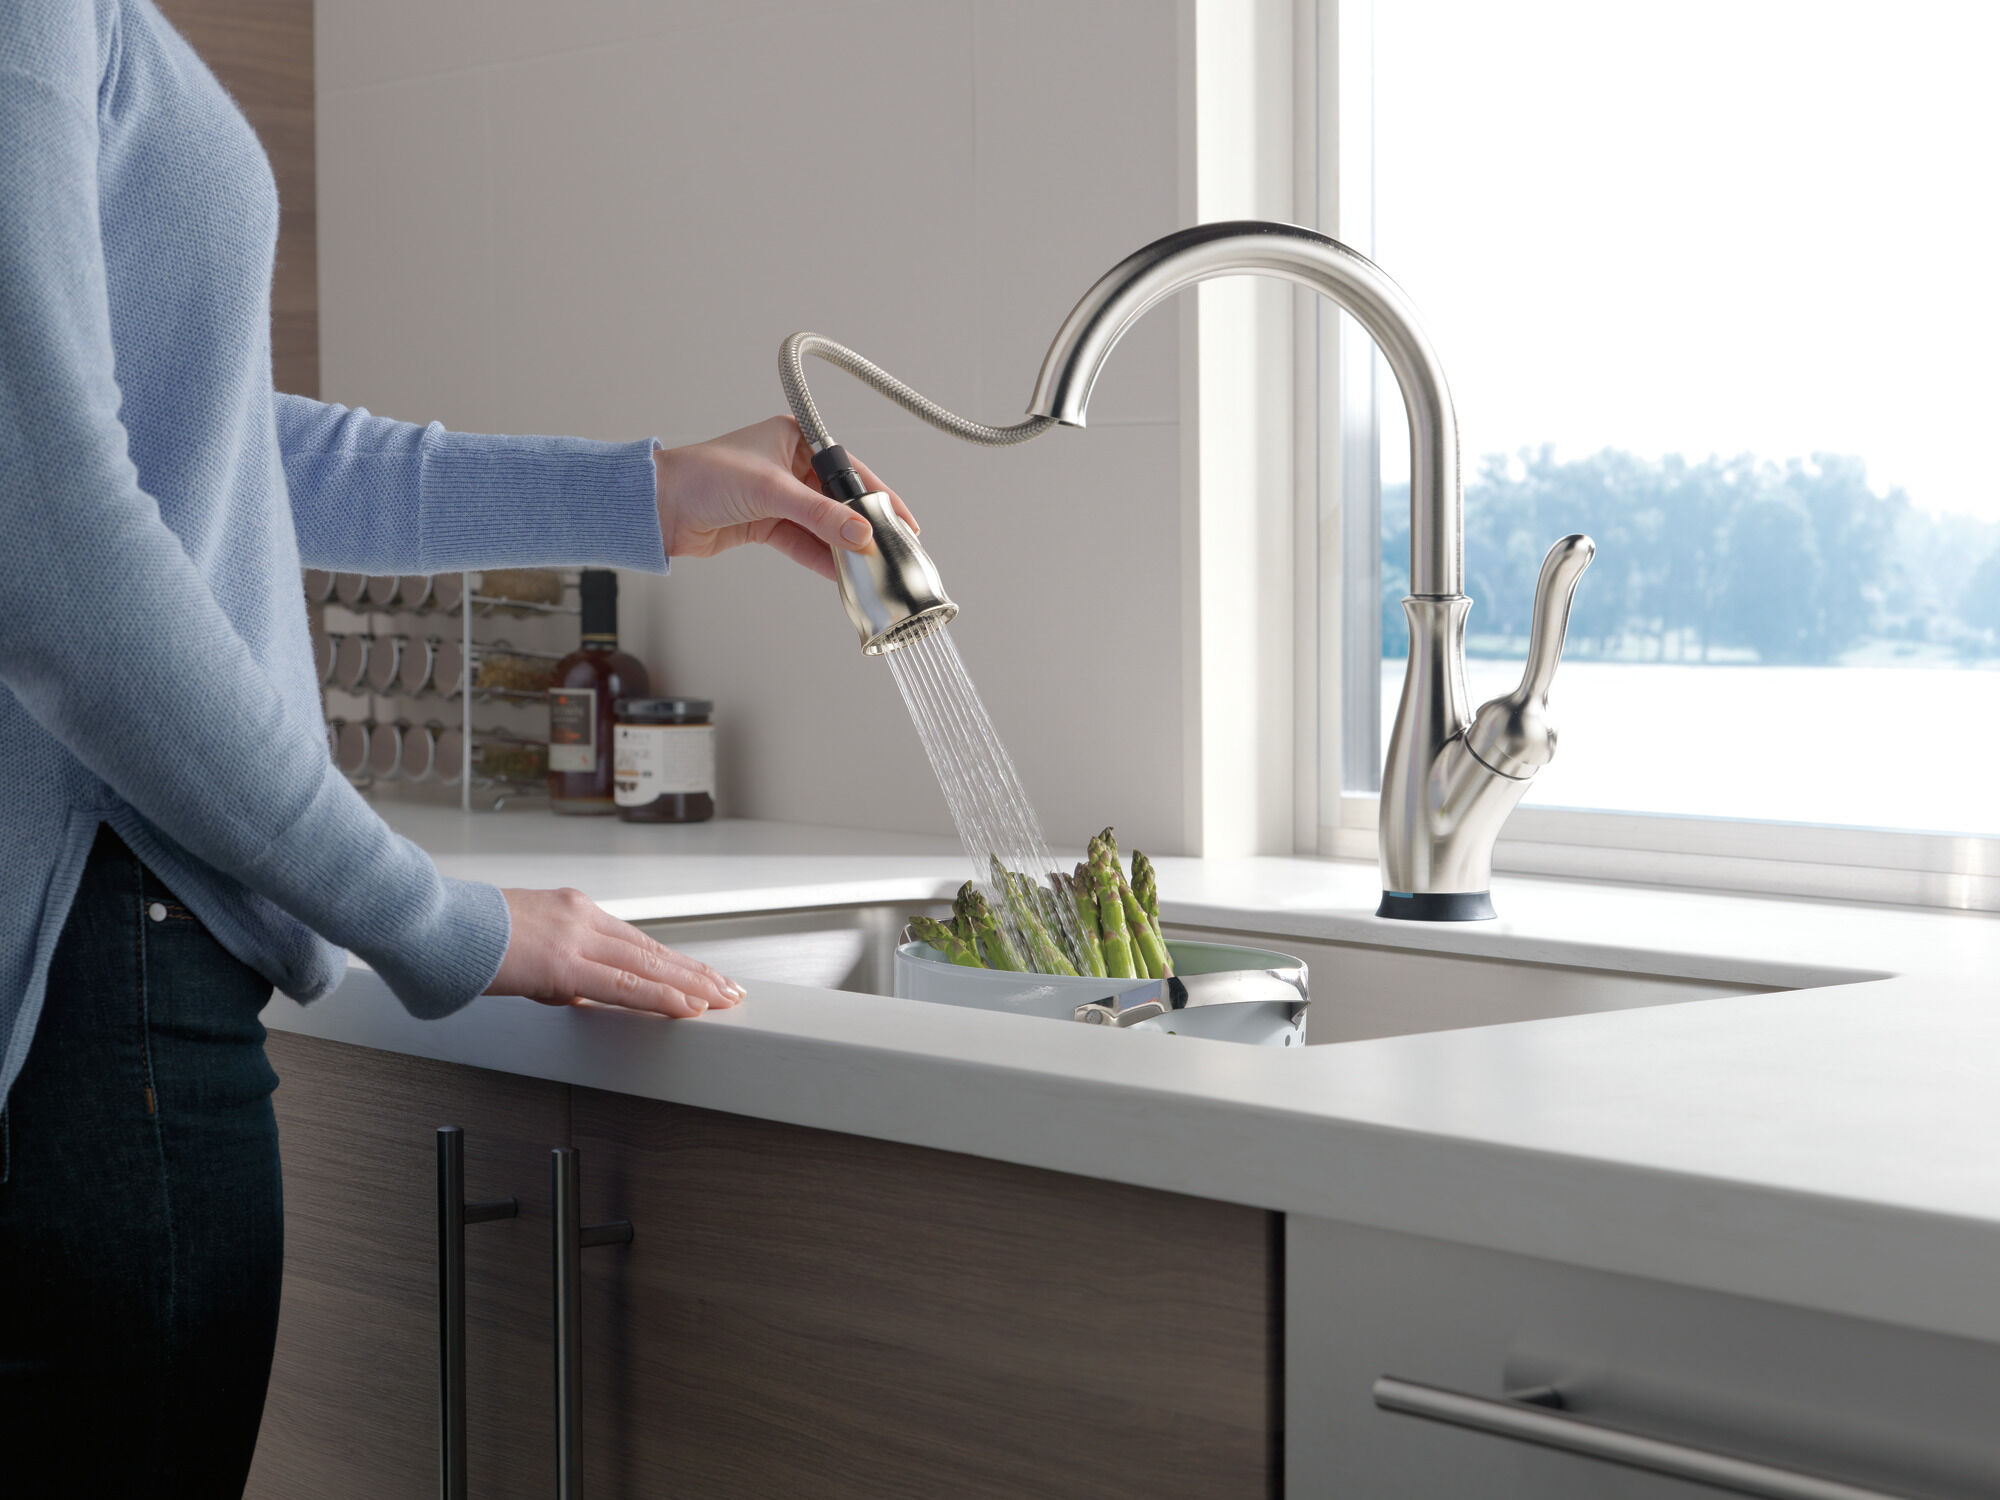 VoiceIQ™ Single Handle Pull-Down Faucet with Touch2O® Technology